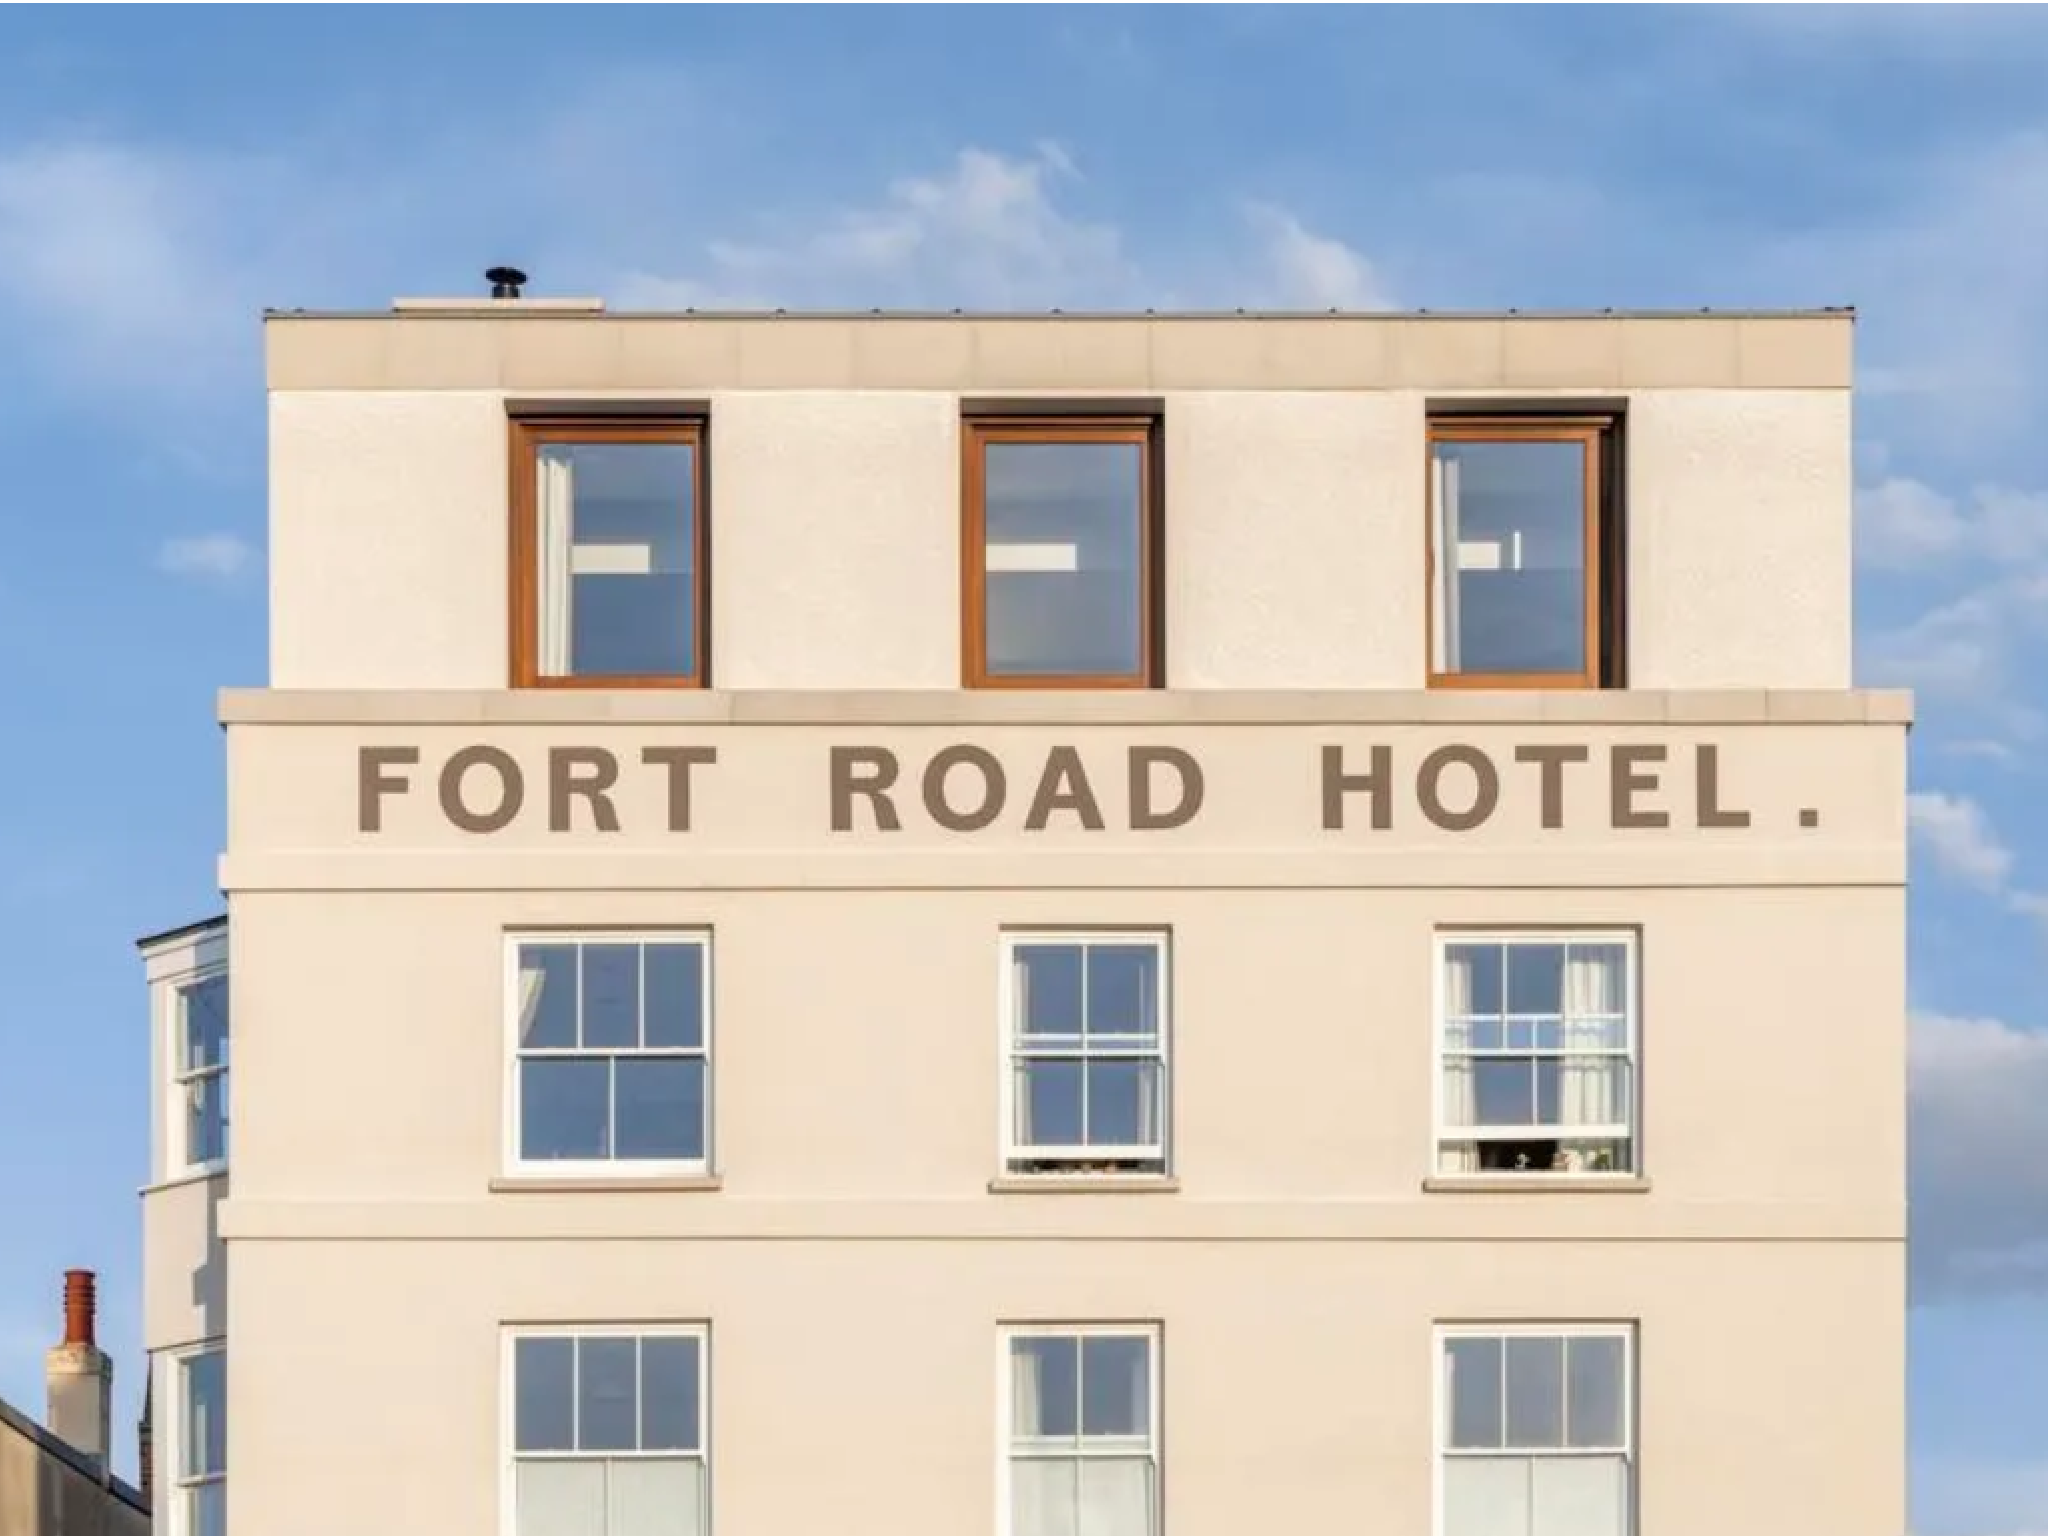 Inside the Fort Road Hotel, you’ll find rooms have mid-century-meets-Edwardian styling